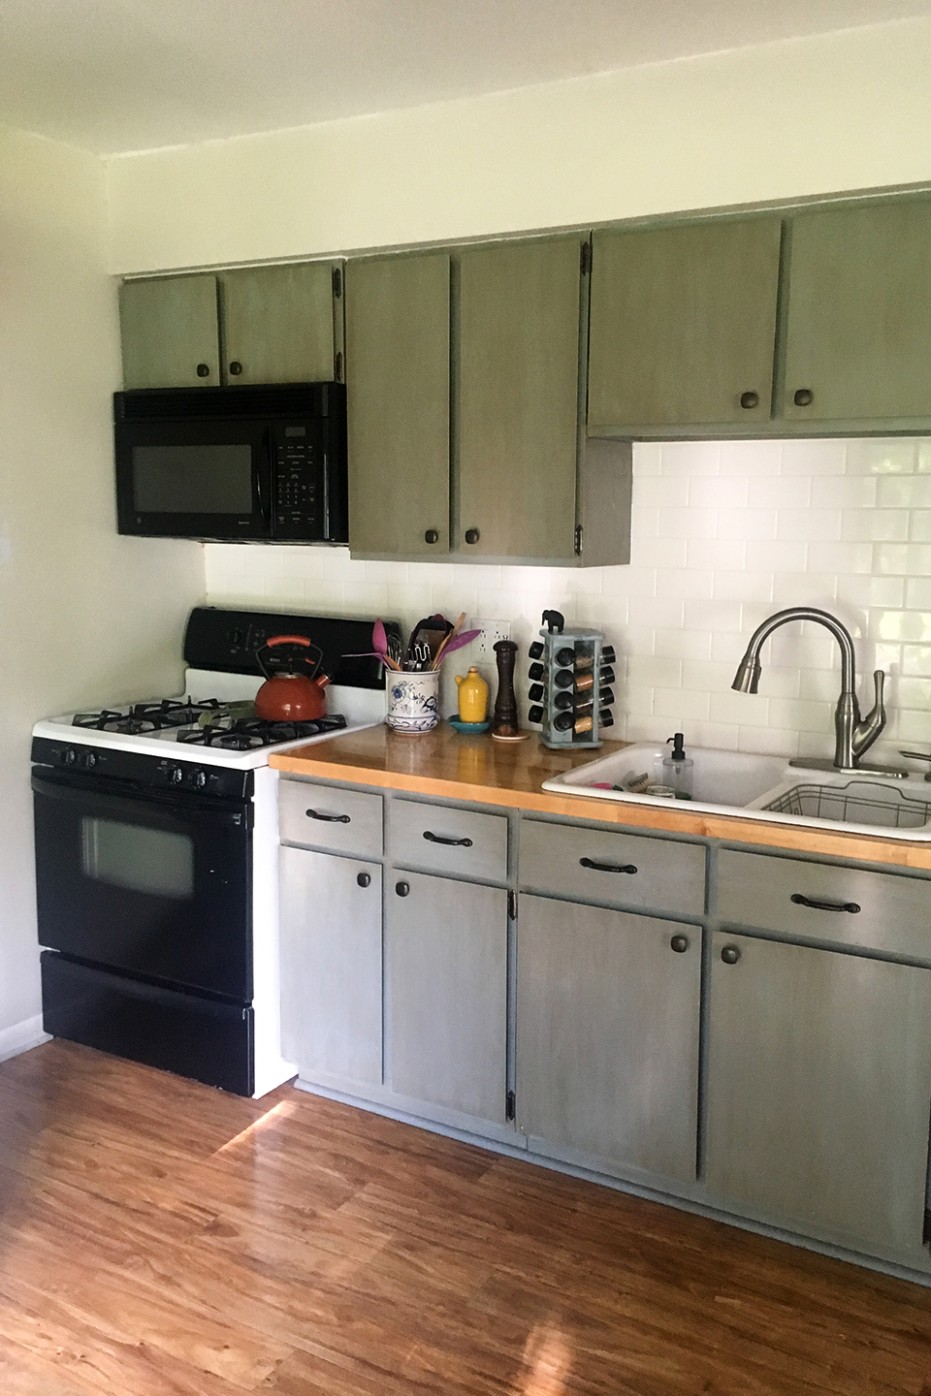 Kitchen Remodel on a Budget: 8 Low-Cost Ideas to Help You Spend Less - how can i update my kitchen for cheap?